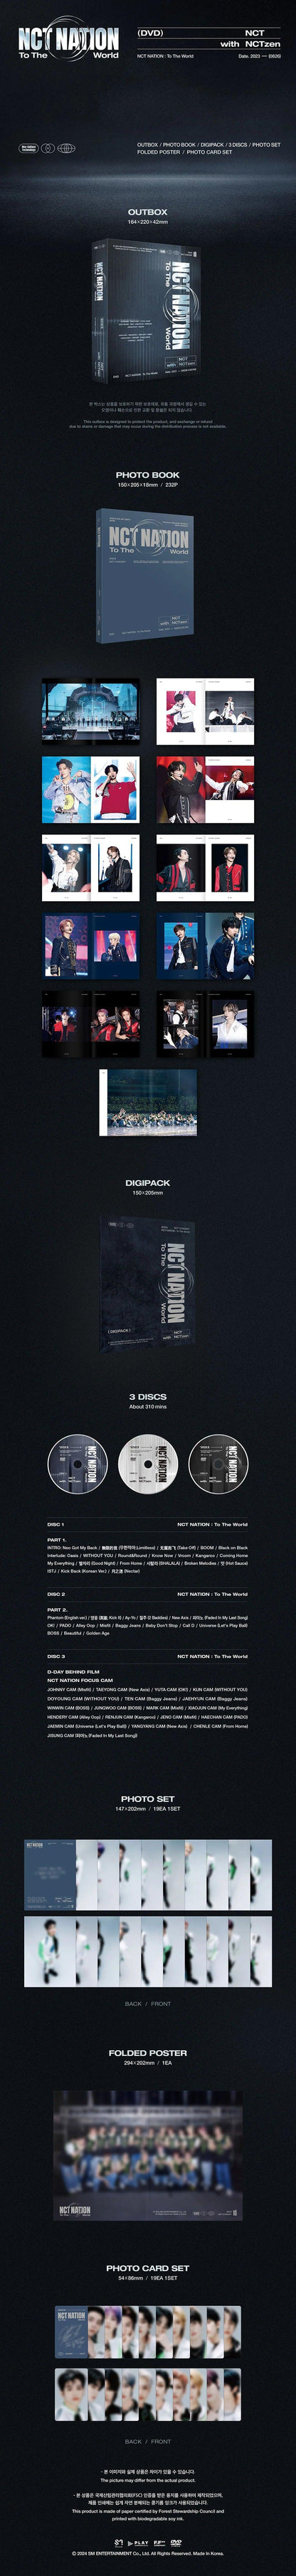 [PRE ORDER] NCT - NCT NATION [TO THE WORLD] in INCHEON DVD - KAEPJJANG SHOP (캡짱 숍)